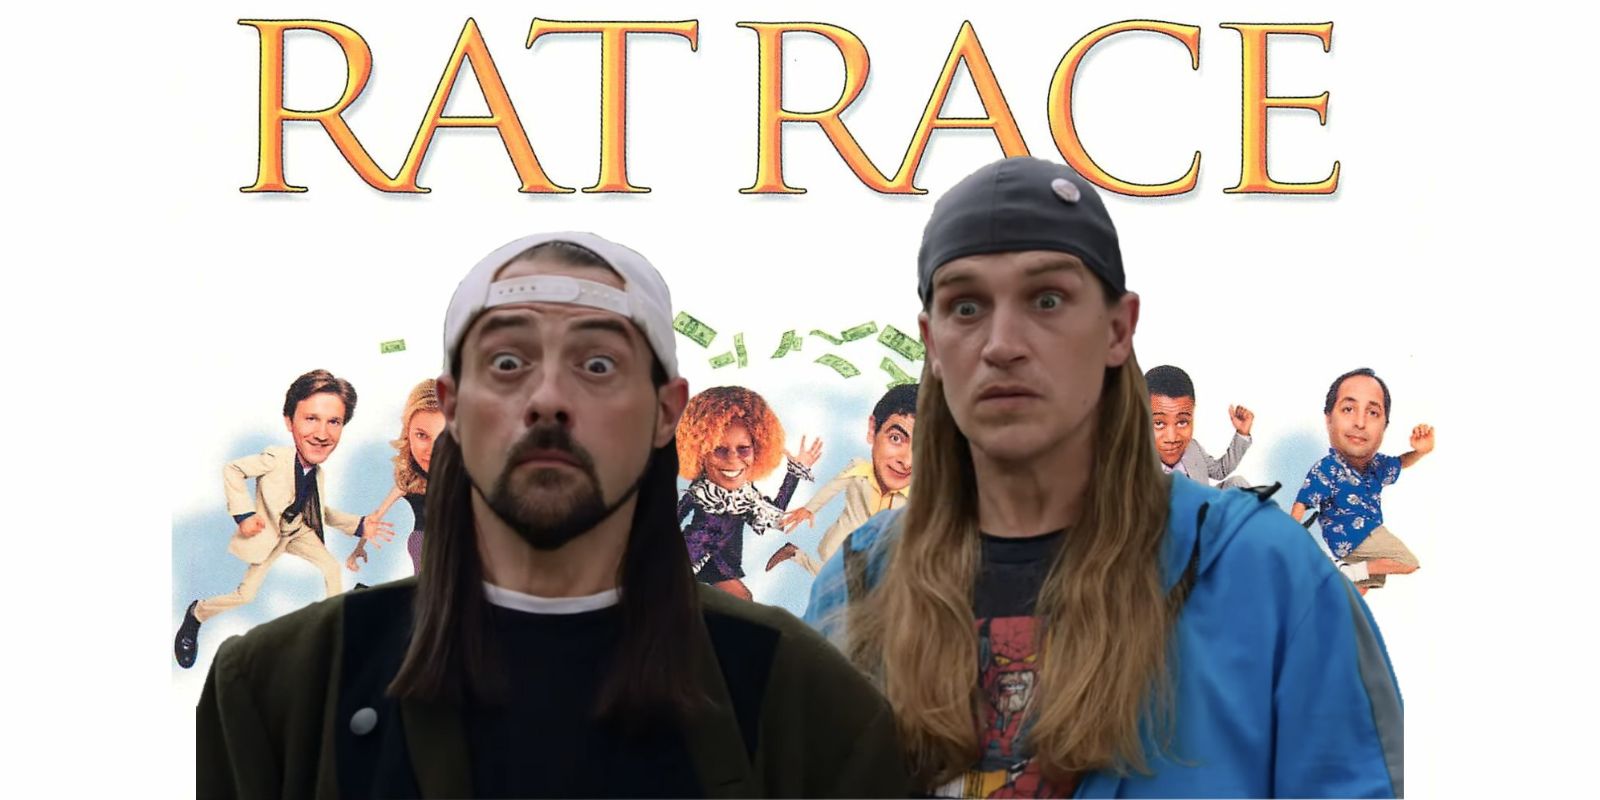 Kevin Smith and Jason Mewes in Rat Race